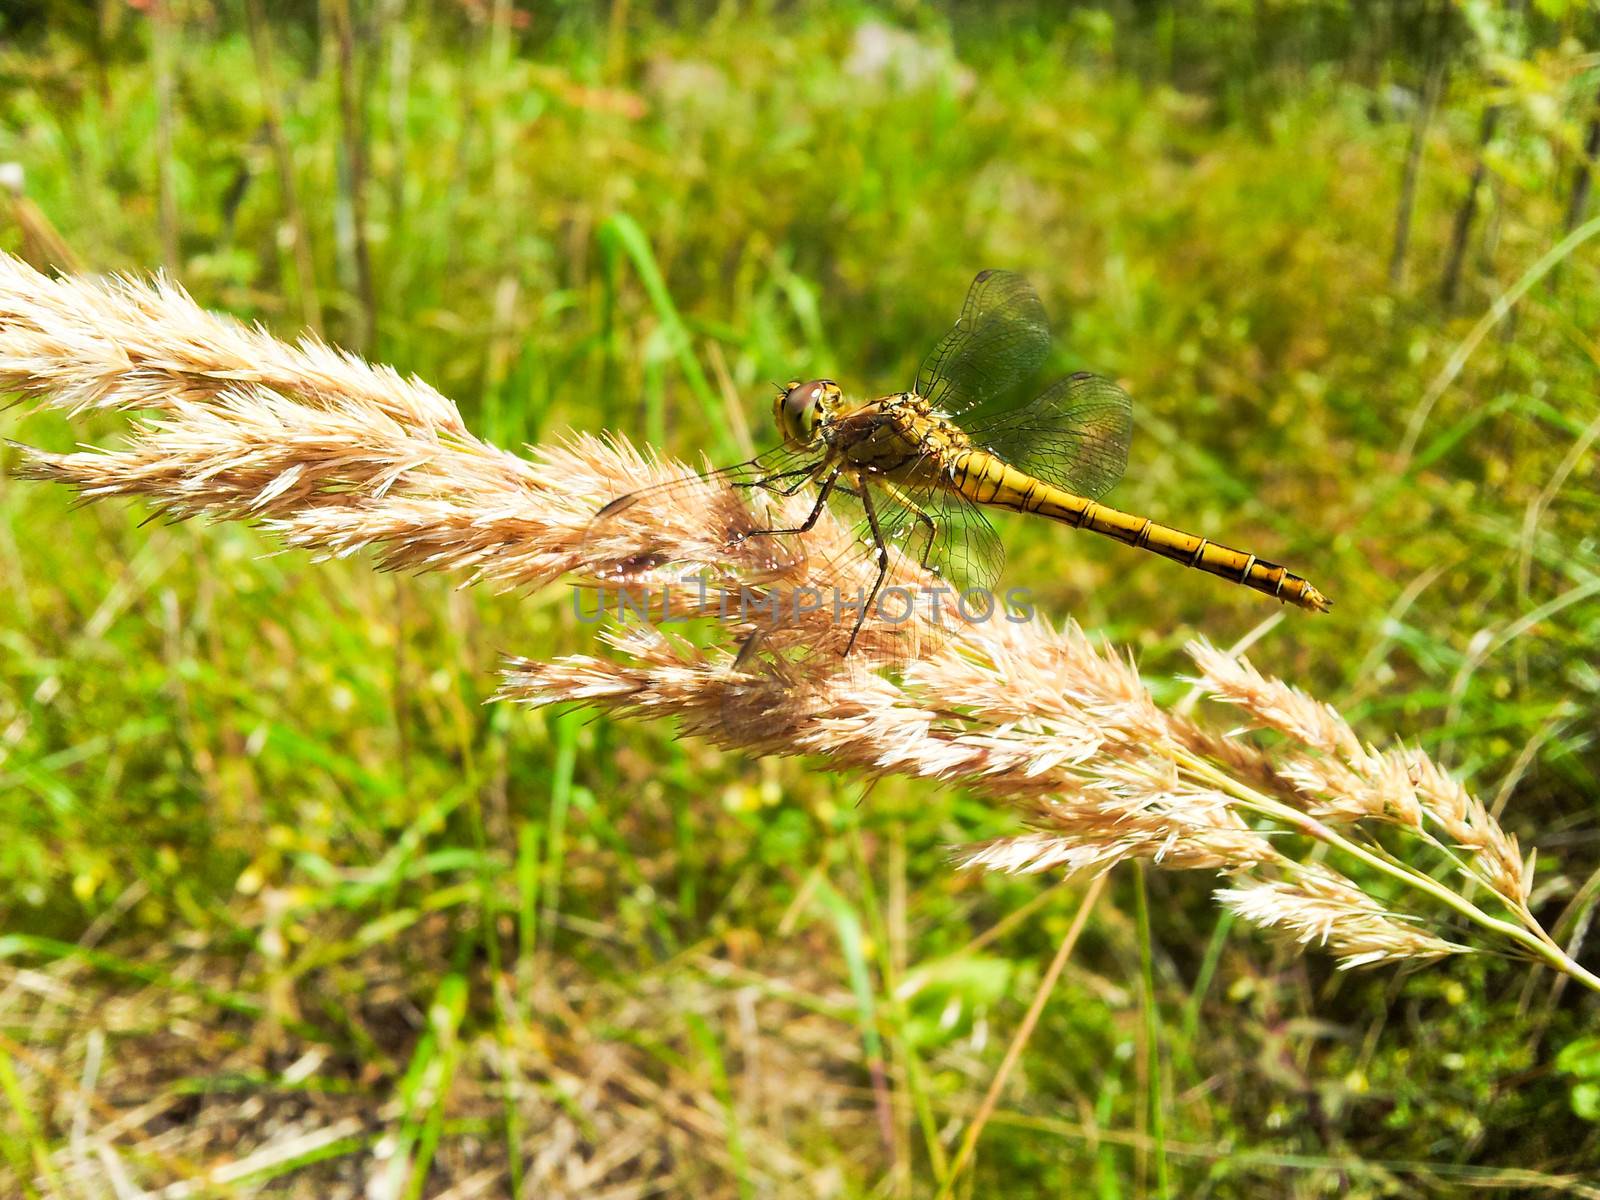 Yellow dragonfly resting on a brown straw towards green grass